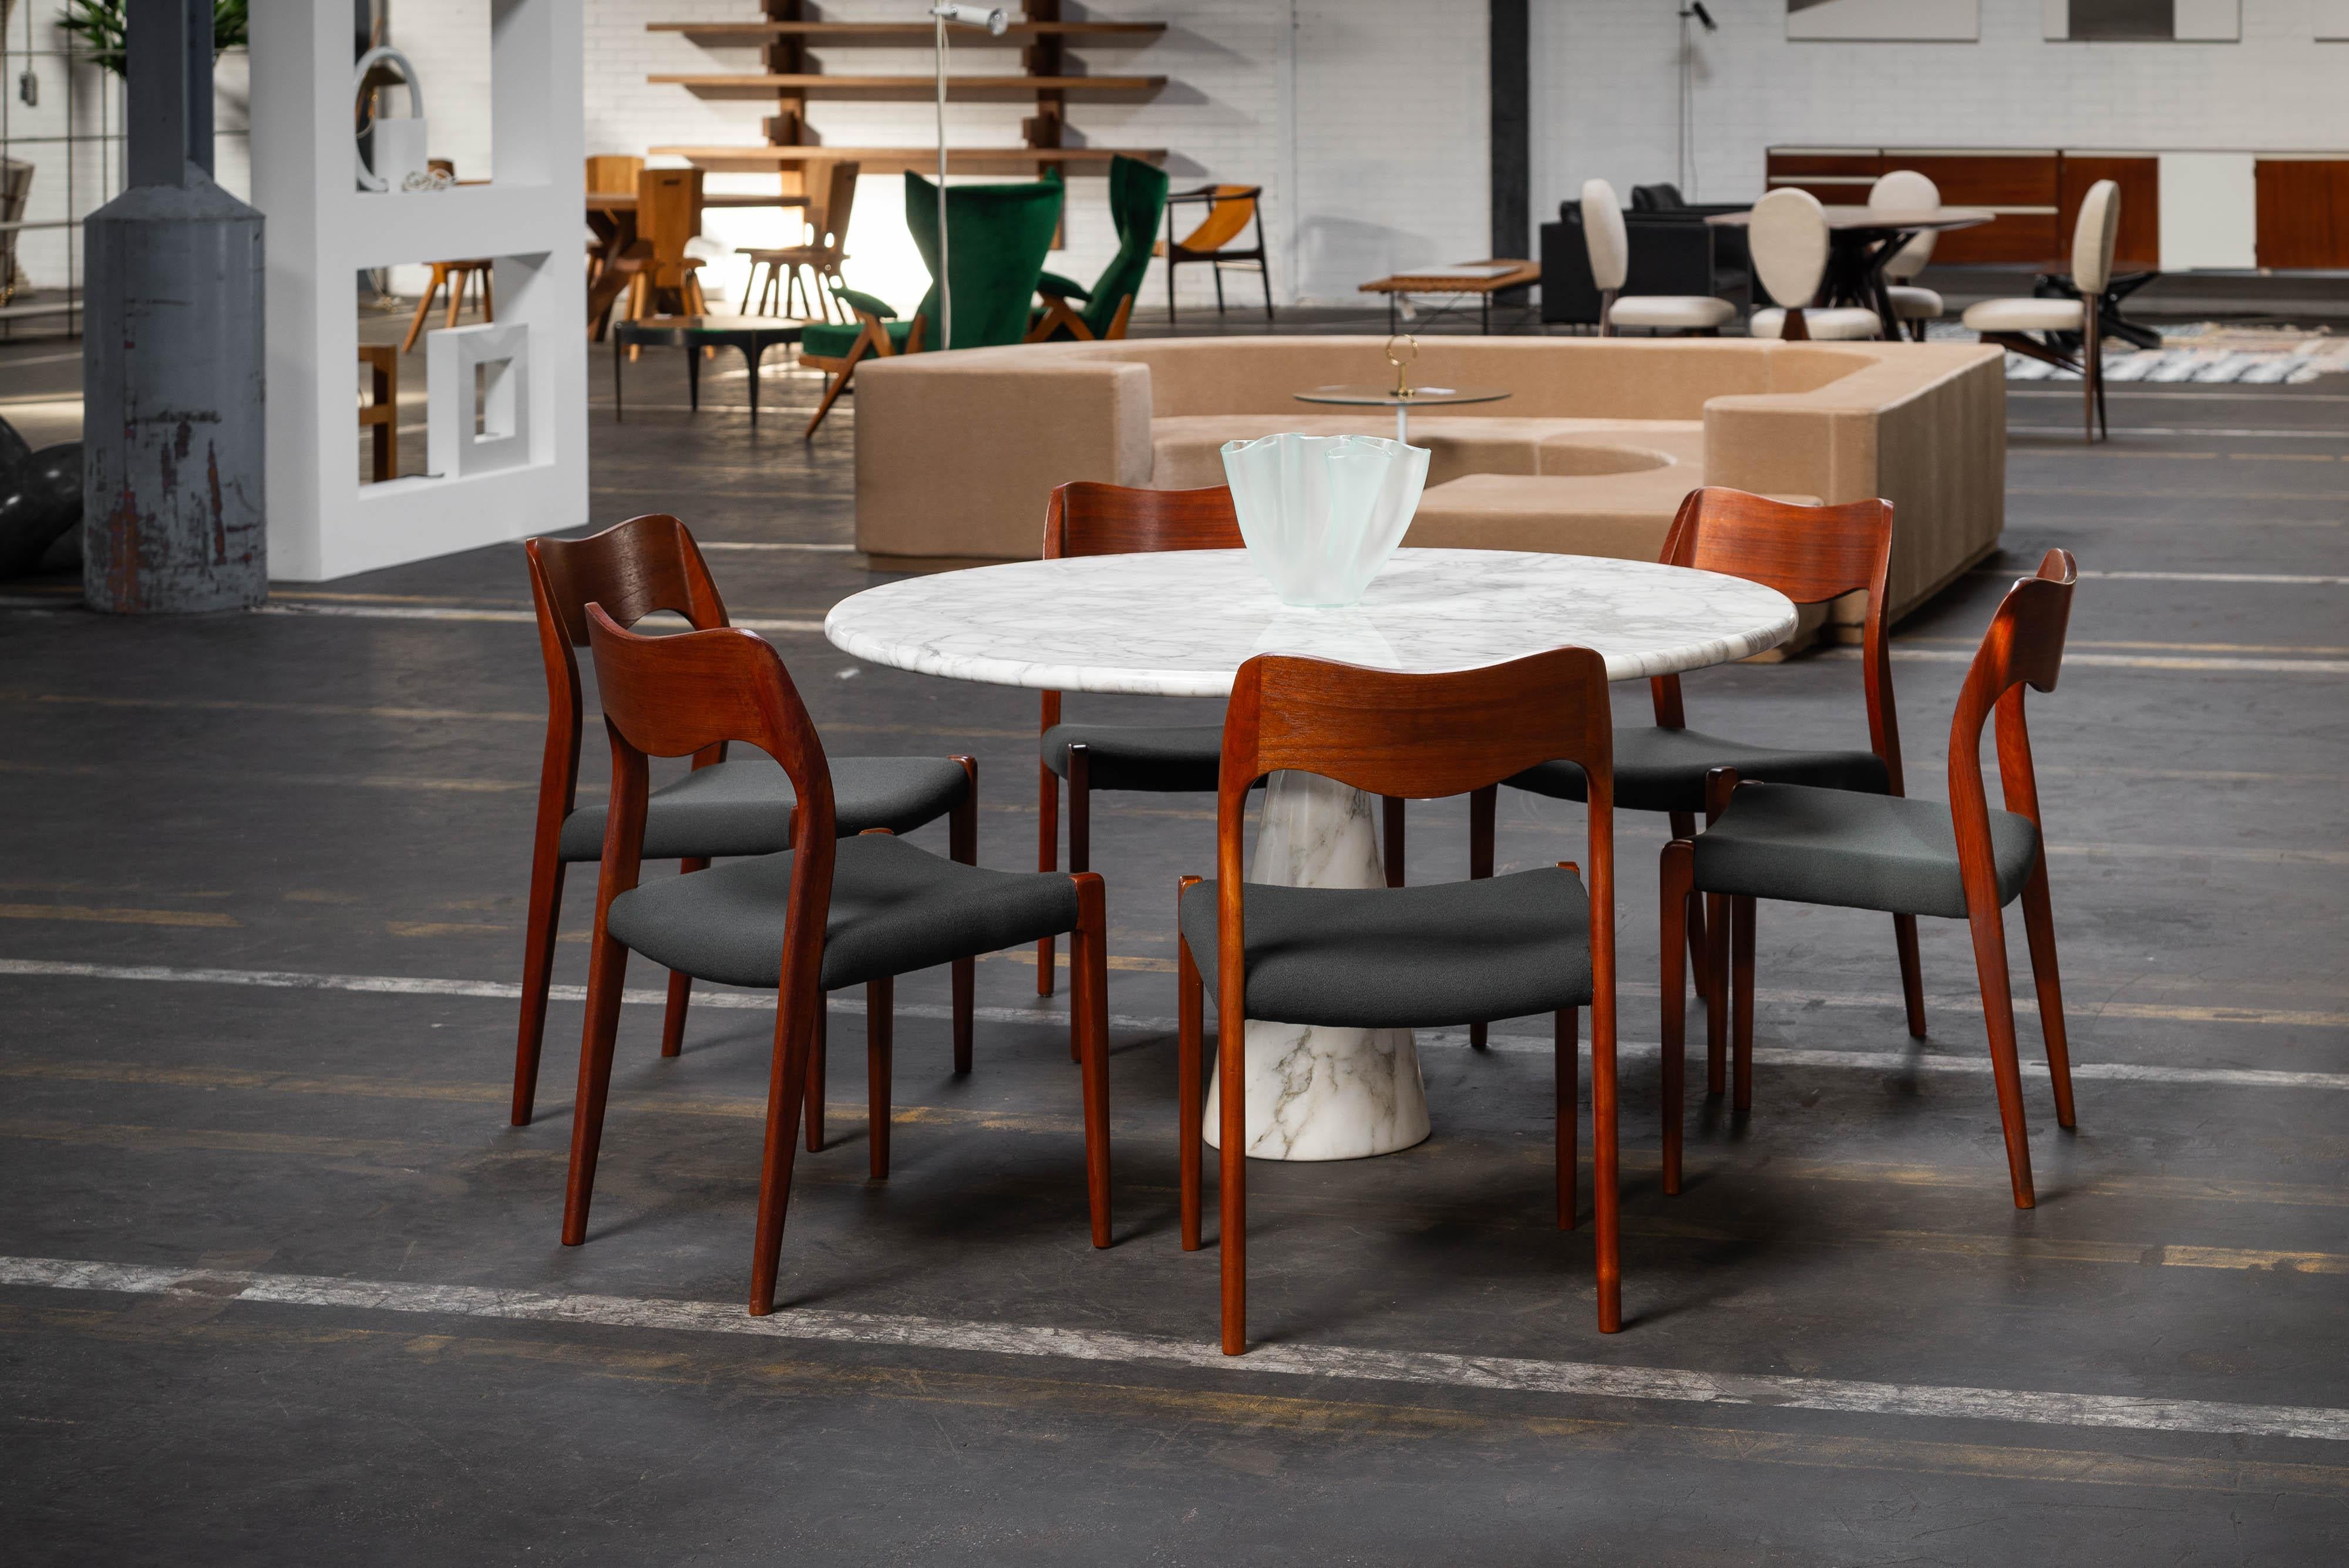 Exceptionally large set of 12 Model 71 chairs designed by Niels Otto Møller and manufactured by J.L. Møller Møbelfabrik in Denmark in 1951. These chairs are not only beautiful but also very practical. They're crafted from solid teak wood and have a